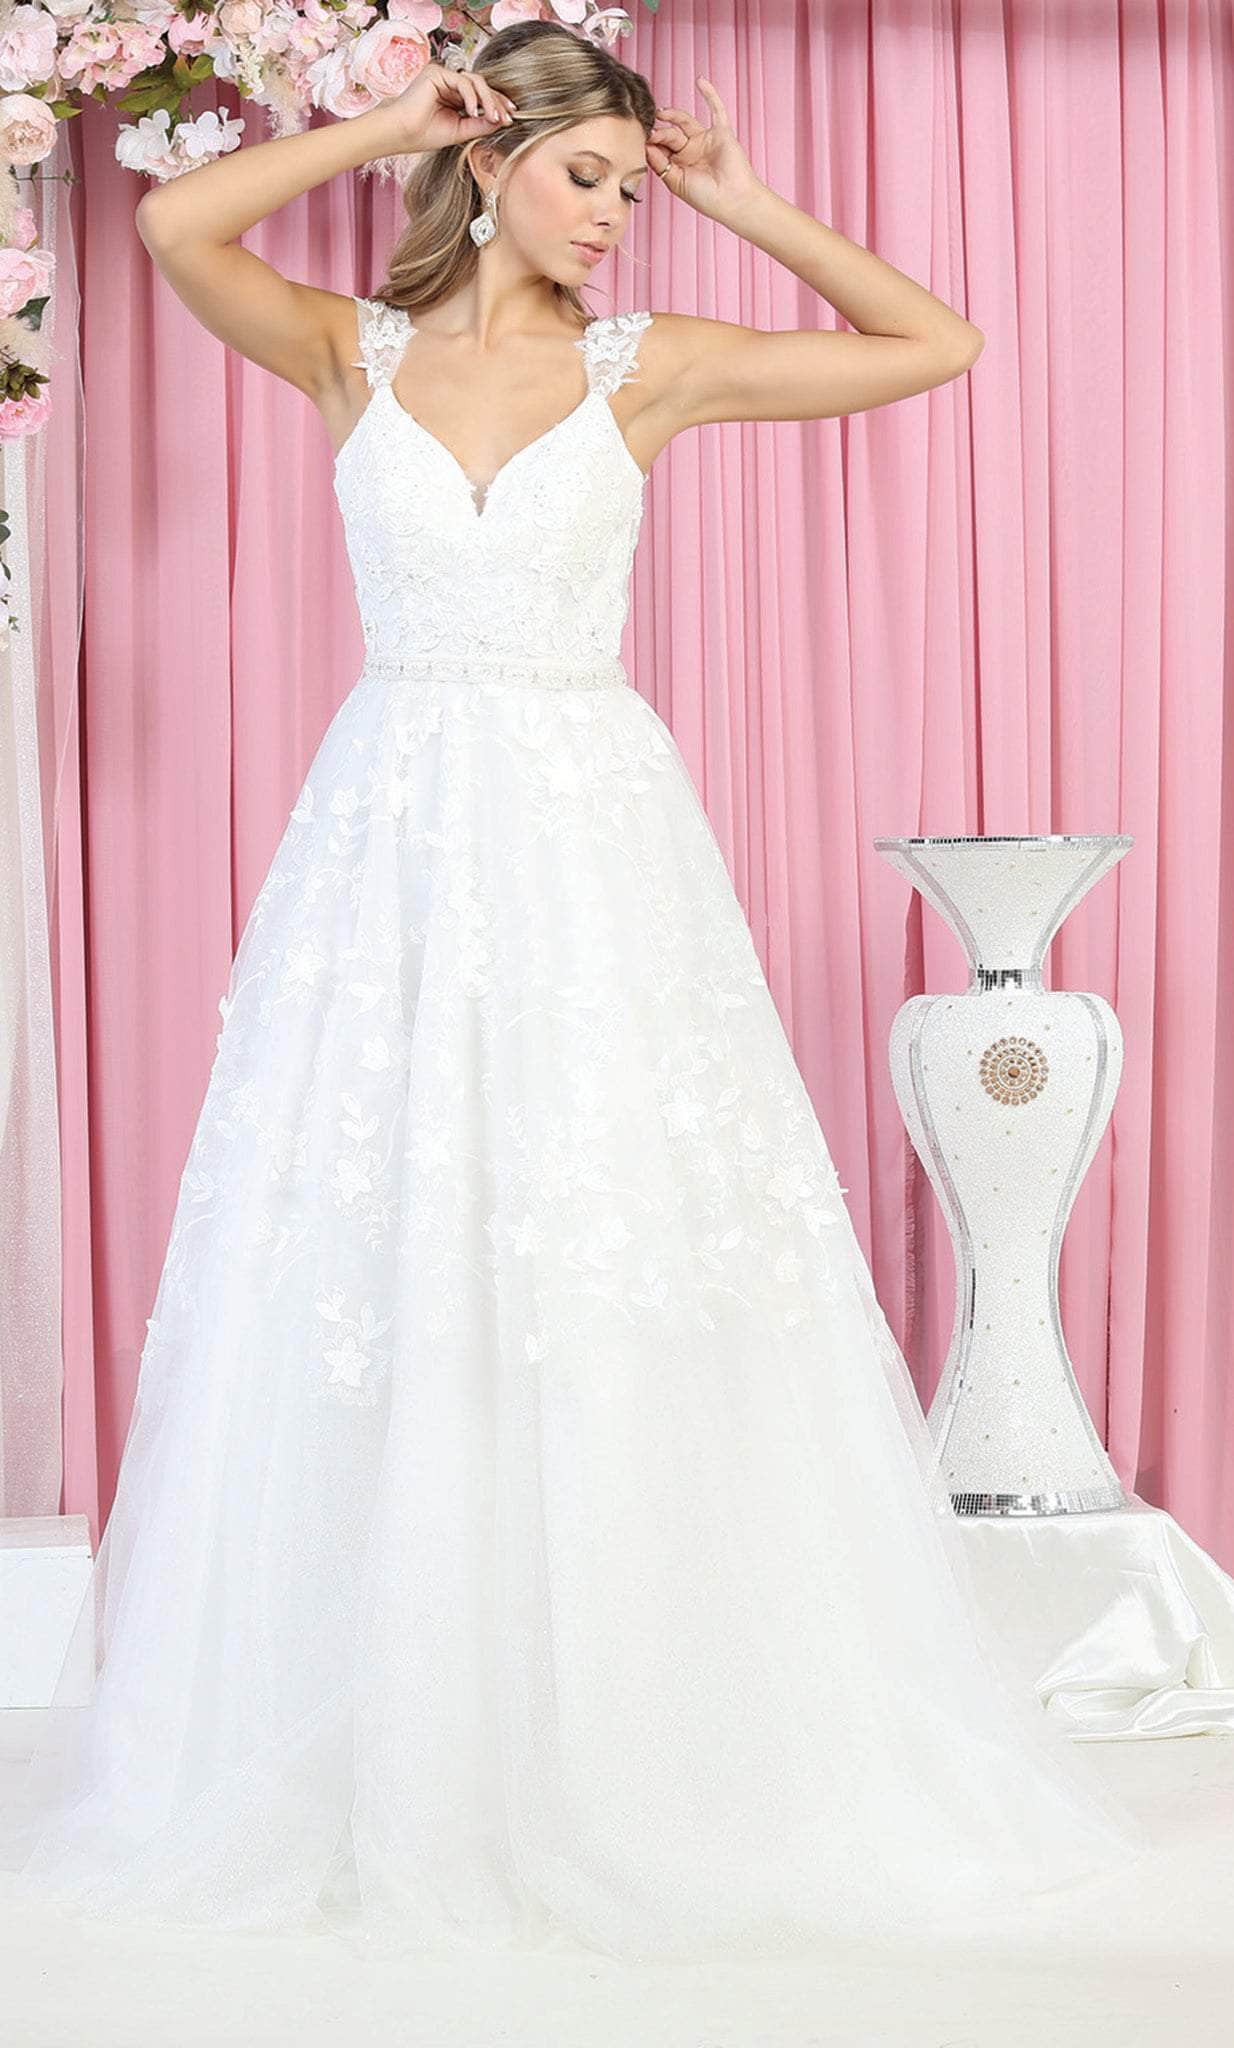 Image of May Queen RQ7926 - Floral V Neck Bridal Gown